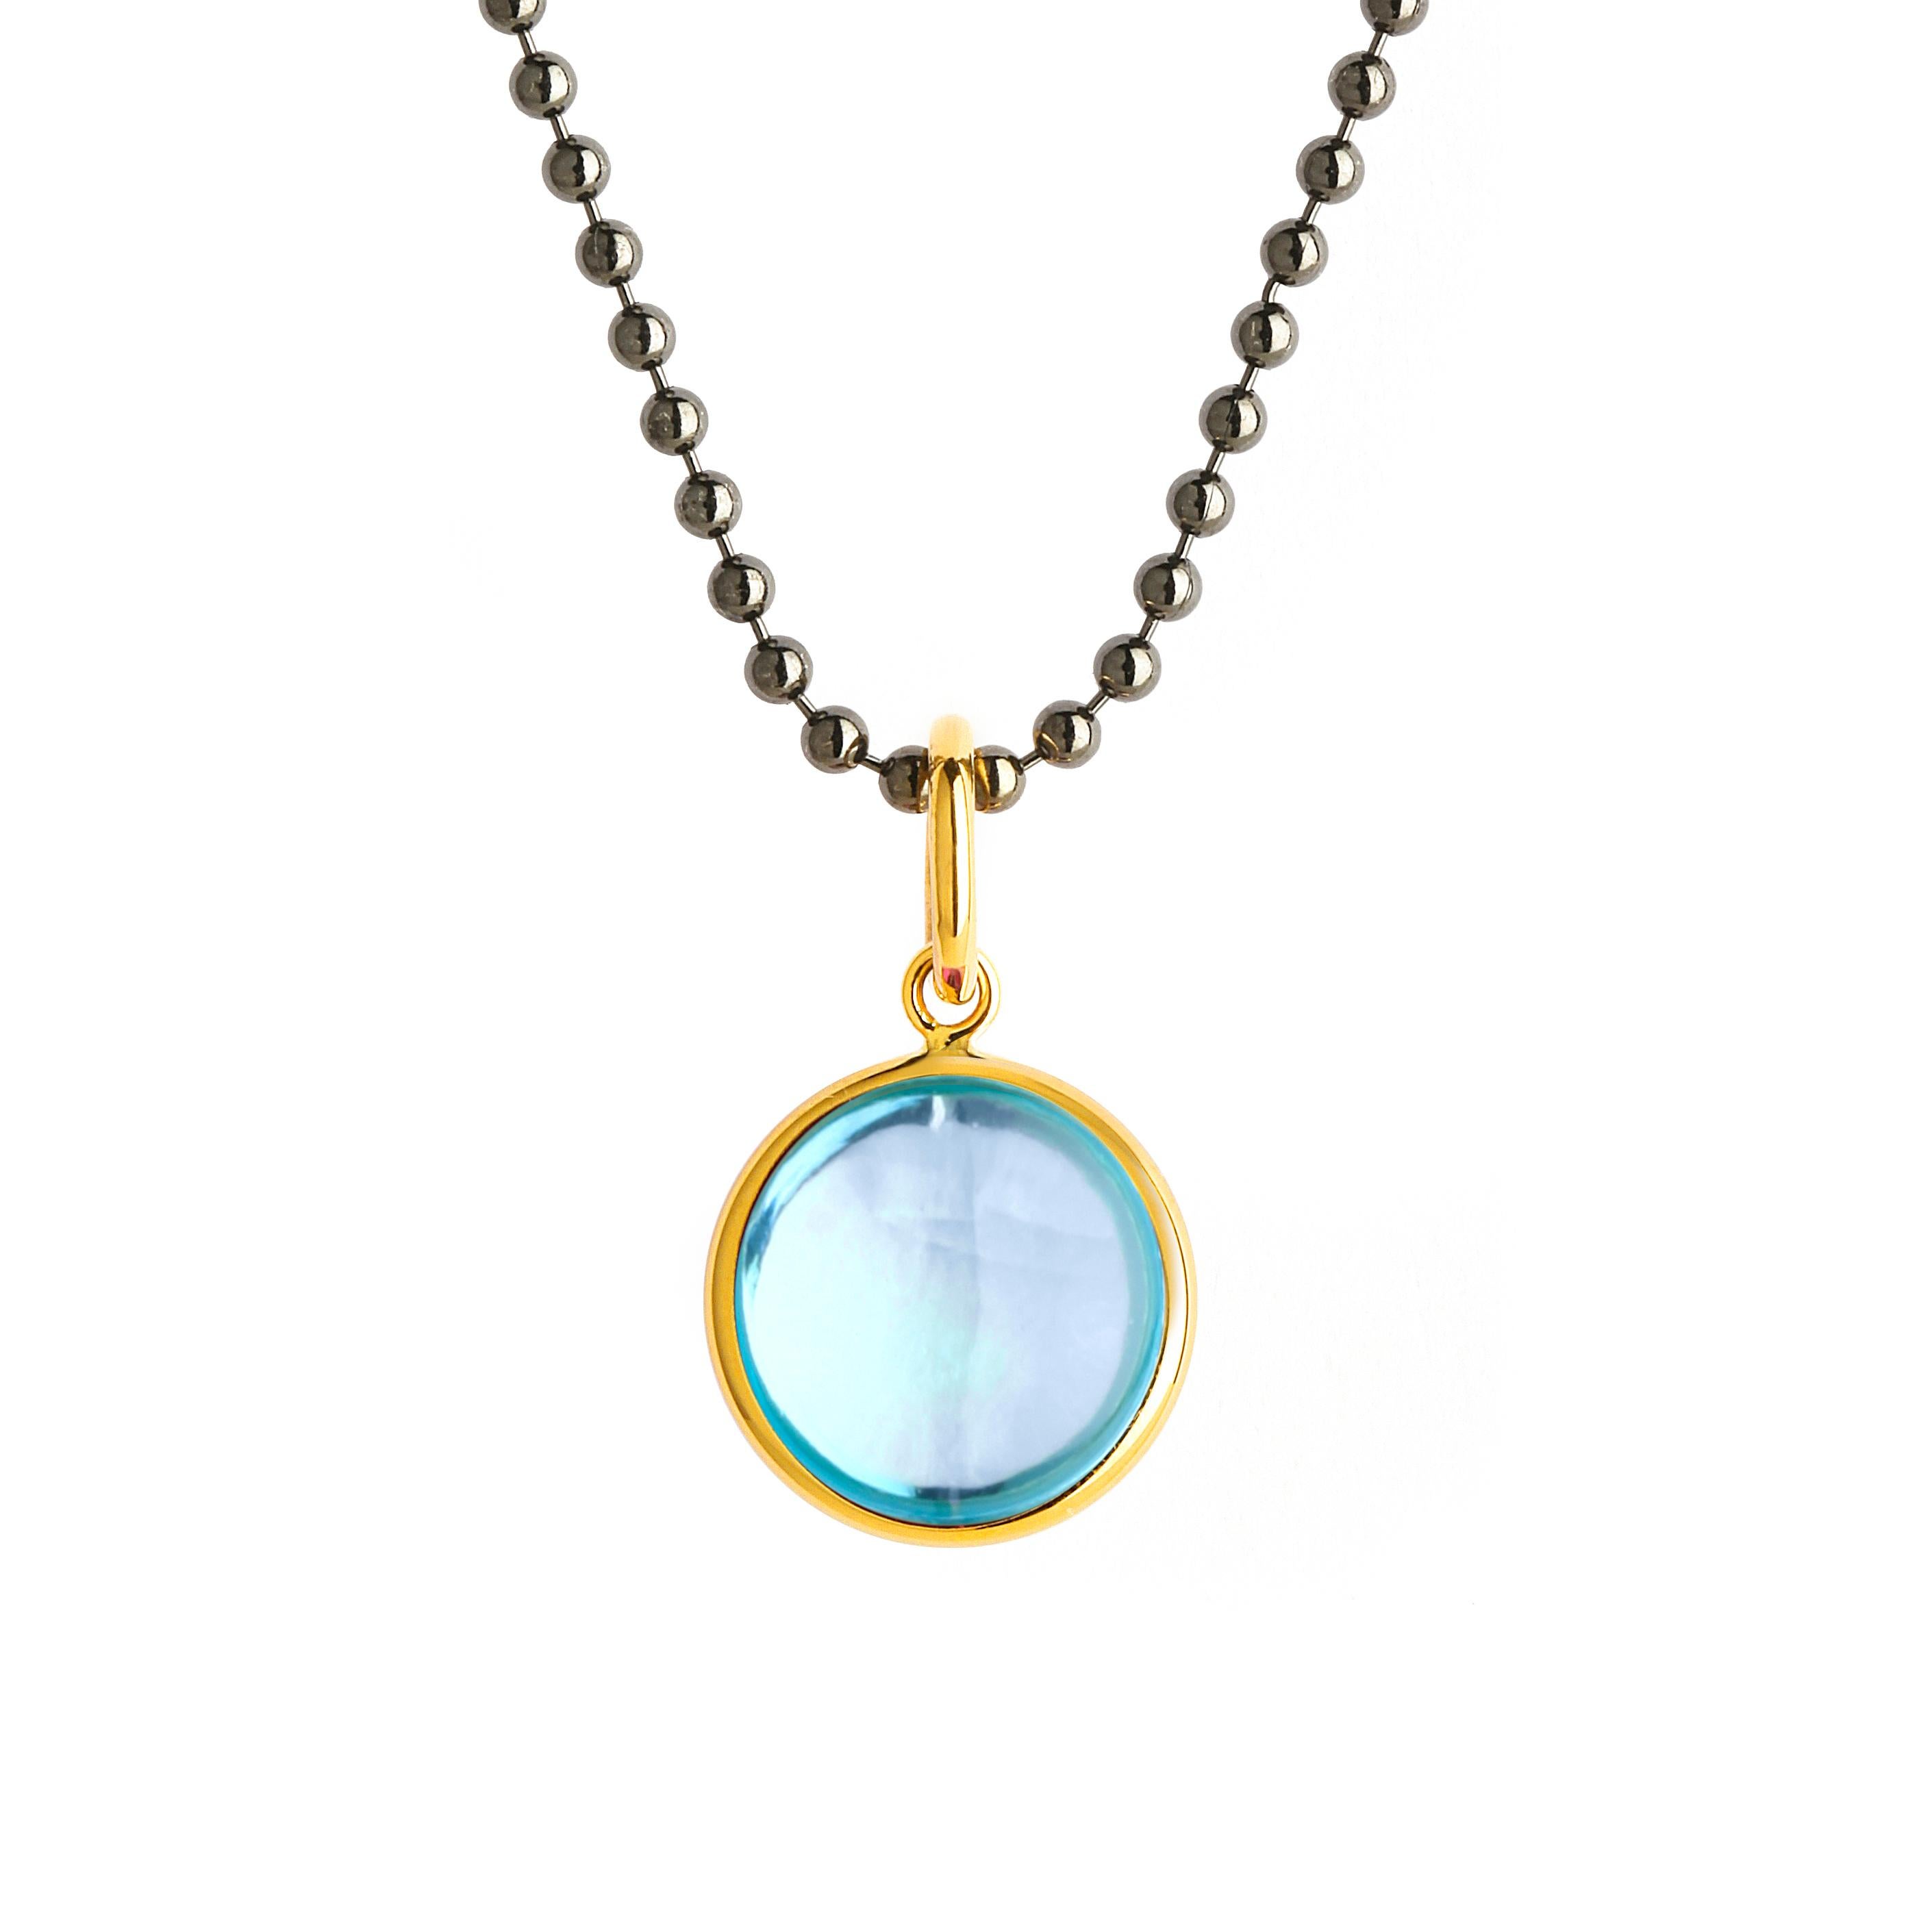 Created in 18 karat yellow gold
10 mm size charm
Aquamarine 3.5 cts approx
March birthstone
Chain sold separately 

Crafted from 18 karat yellow gold and measuring 10mm in size, this decadent pendant is adorned with a beautiful aquamarine gemstone